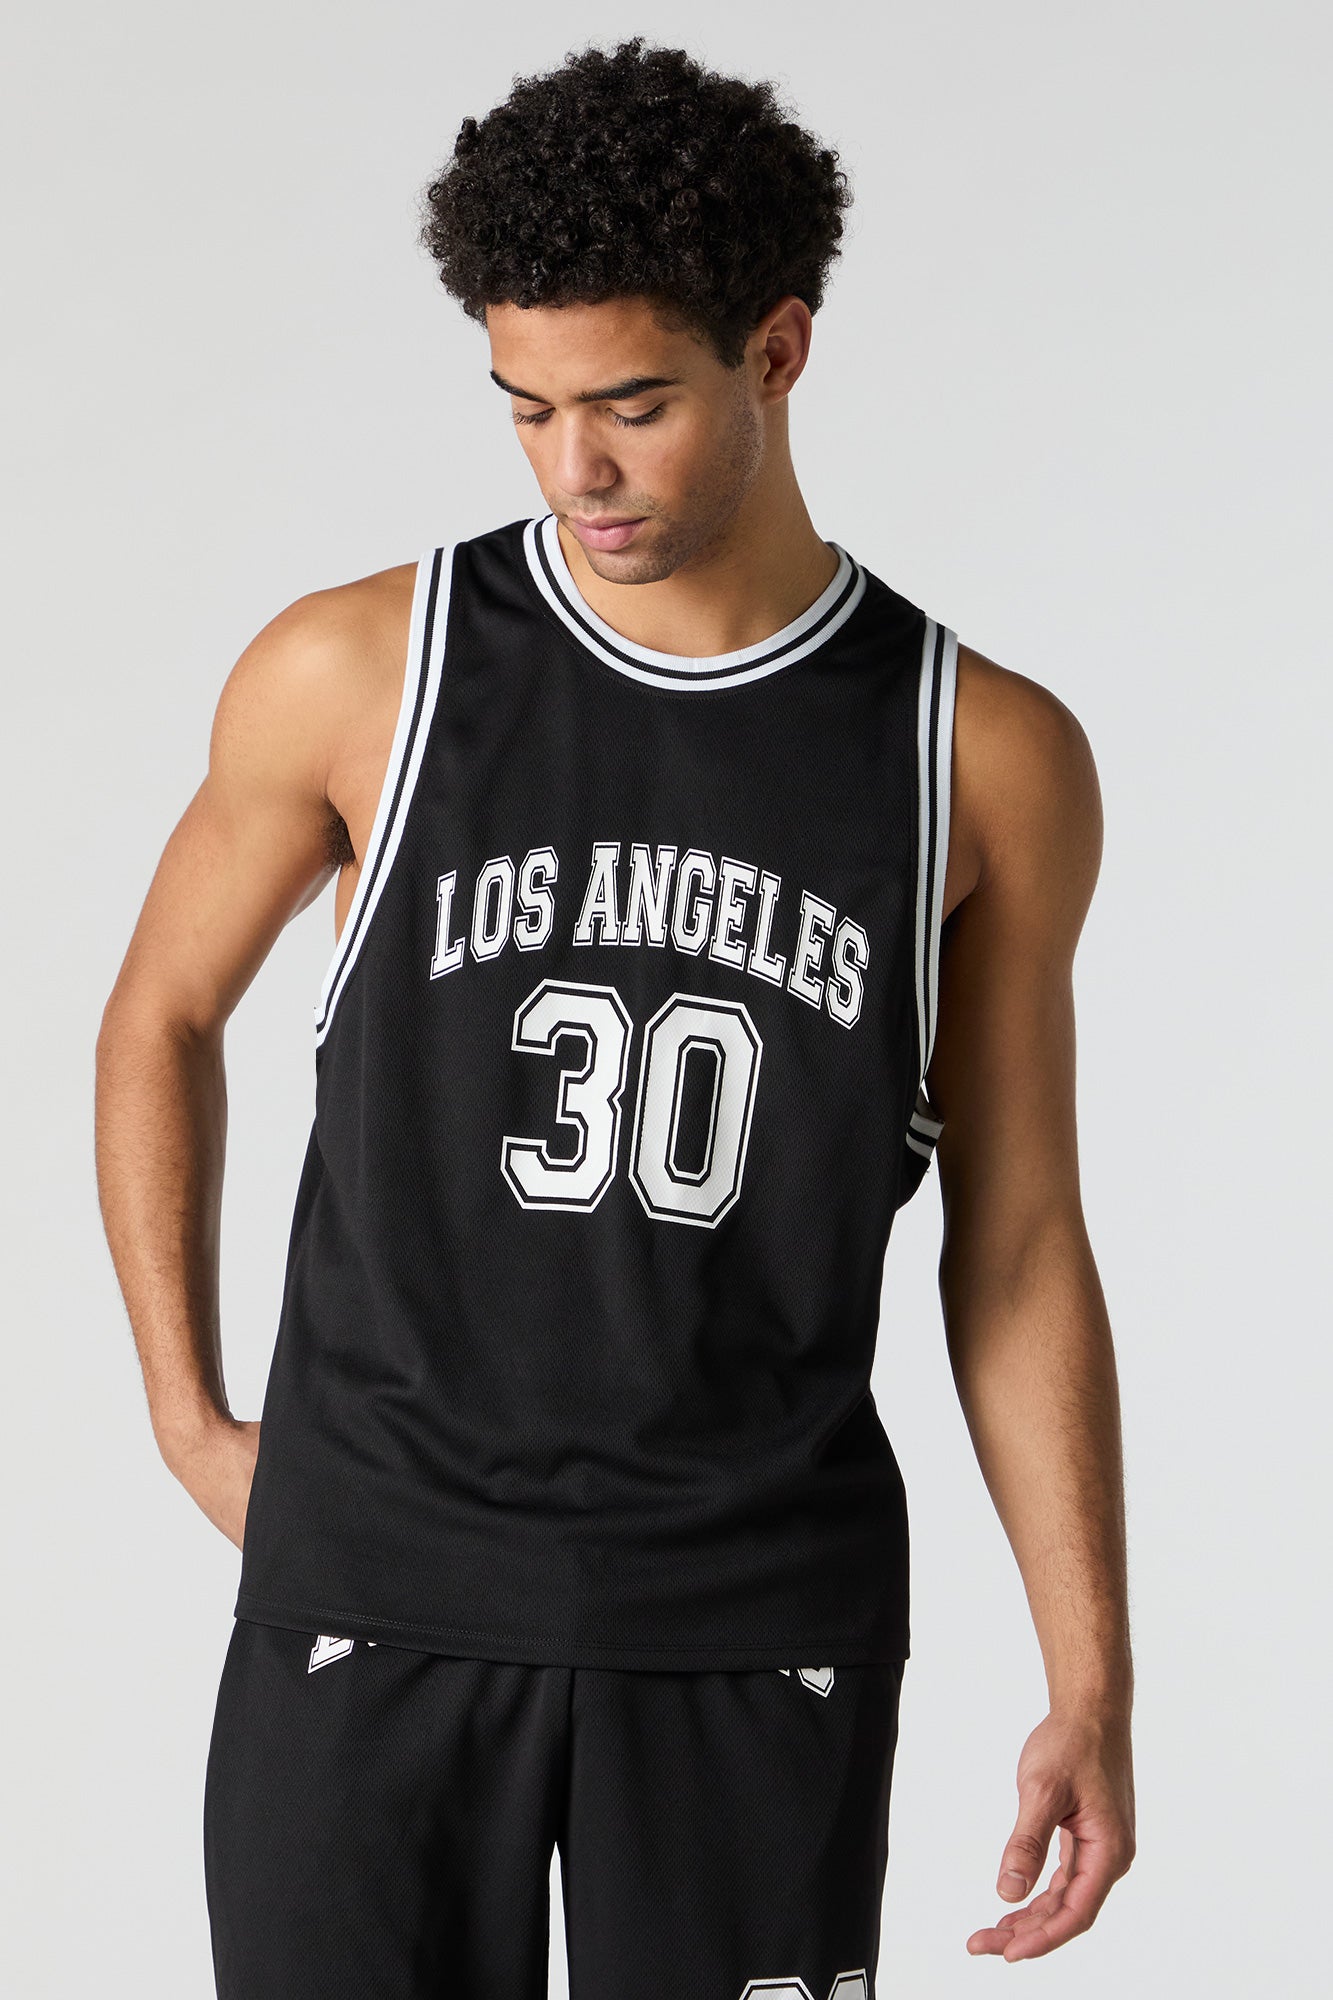 Los Angeles Graphic Mesh Basketball Jersey